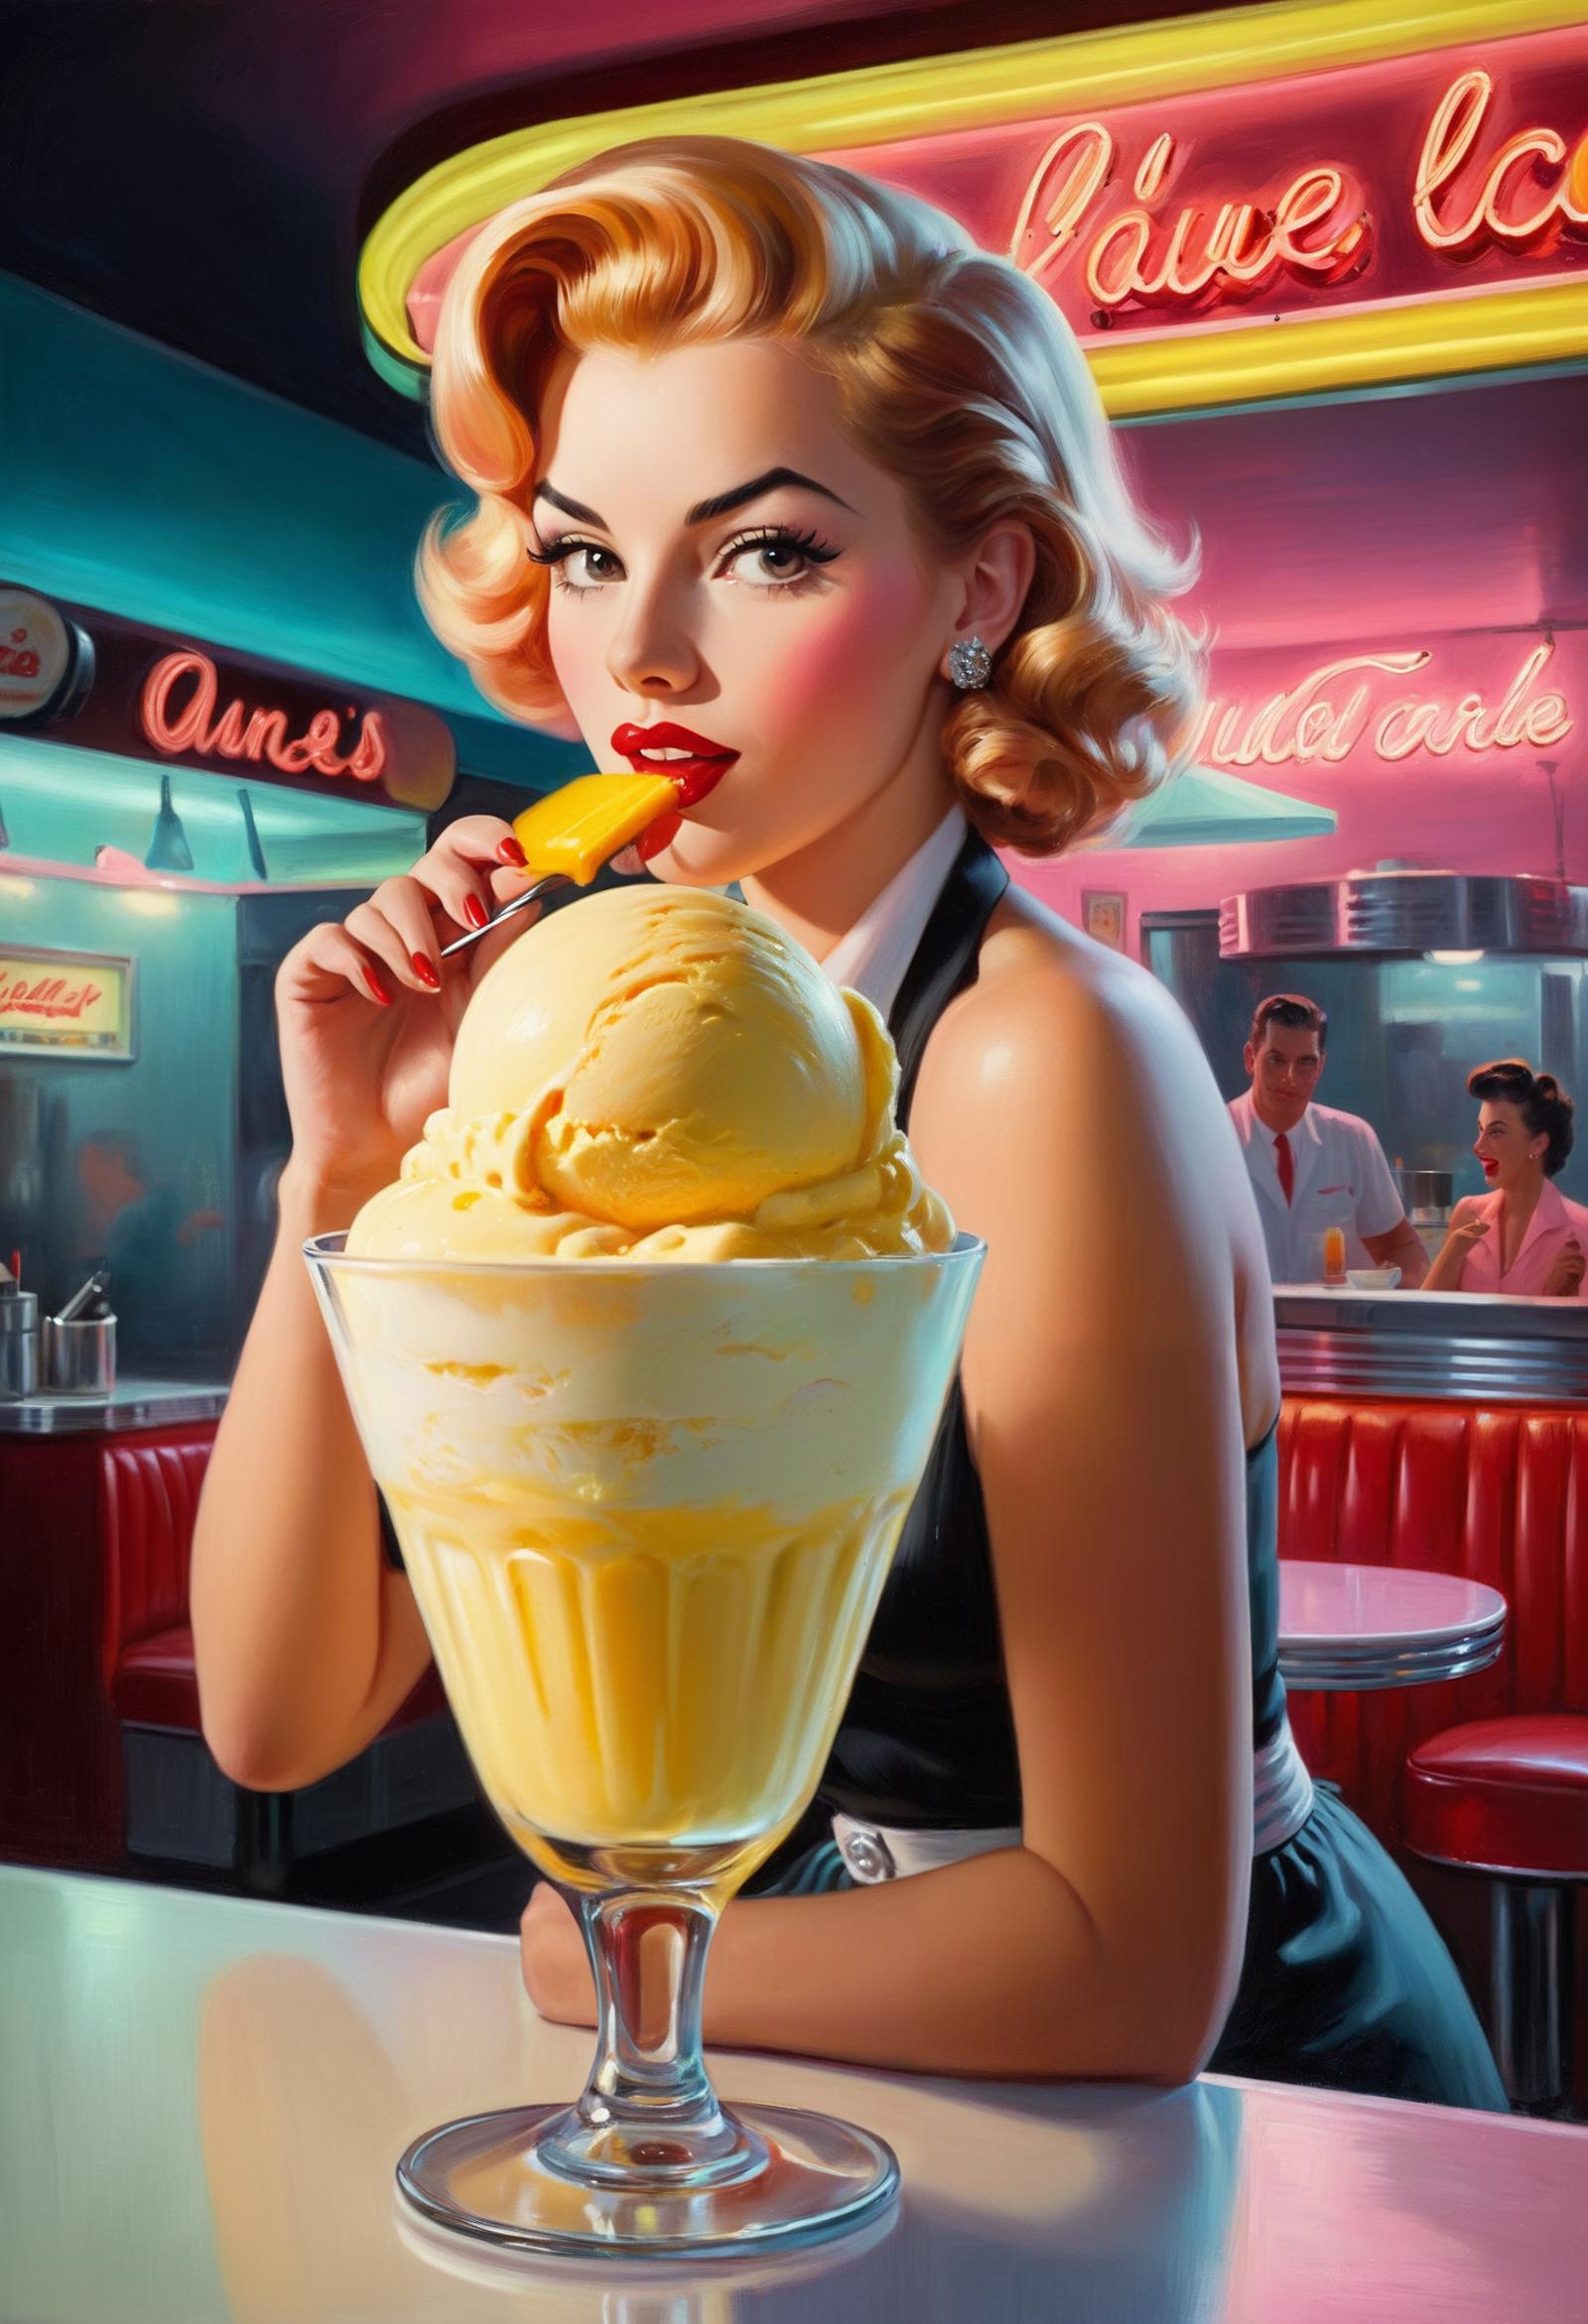 Woman in a Diner Holding a Glass Bowl of Ice Cream